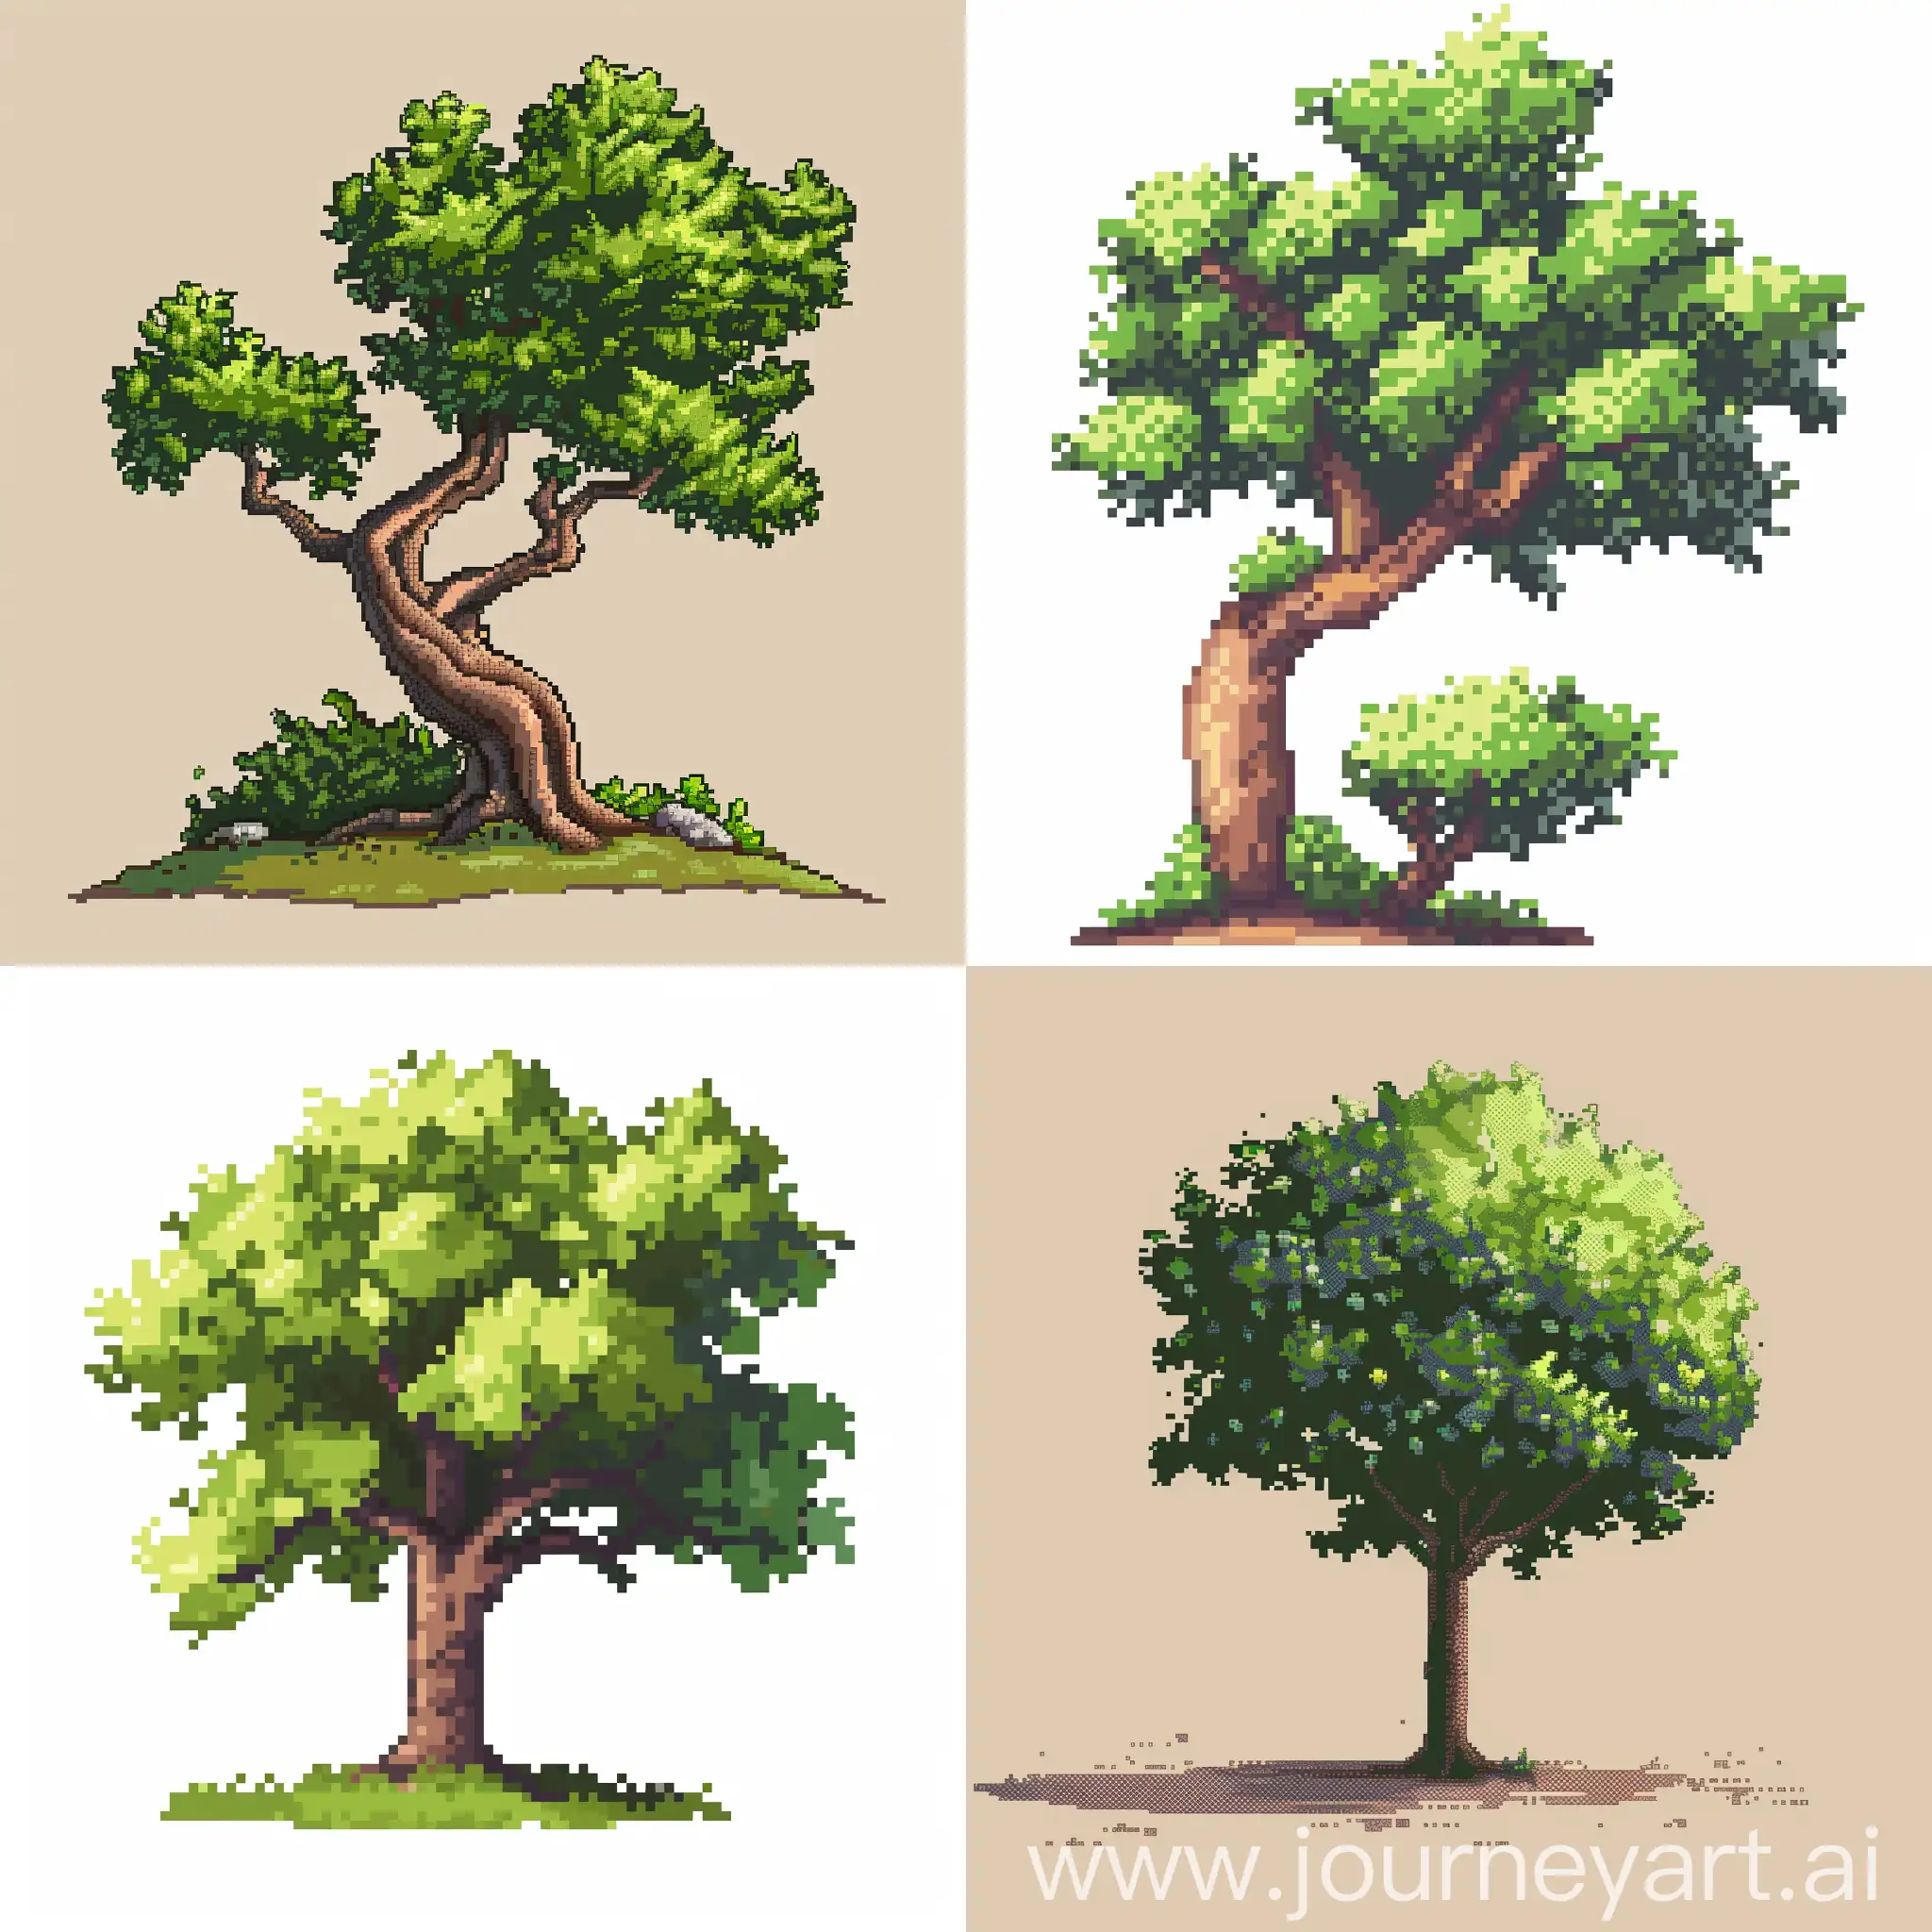 Whimsical-Pixel-Art-Tree-with-Vibrant-Colors